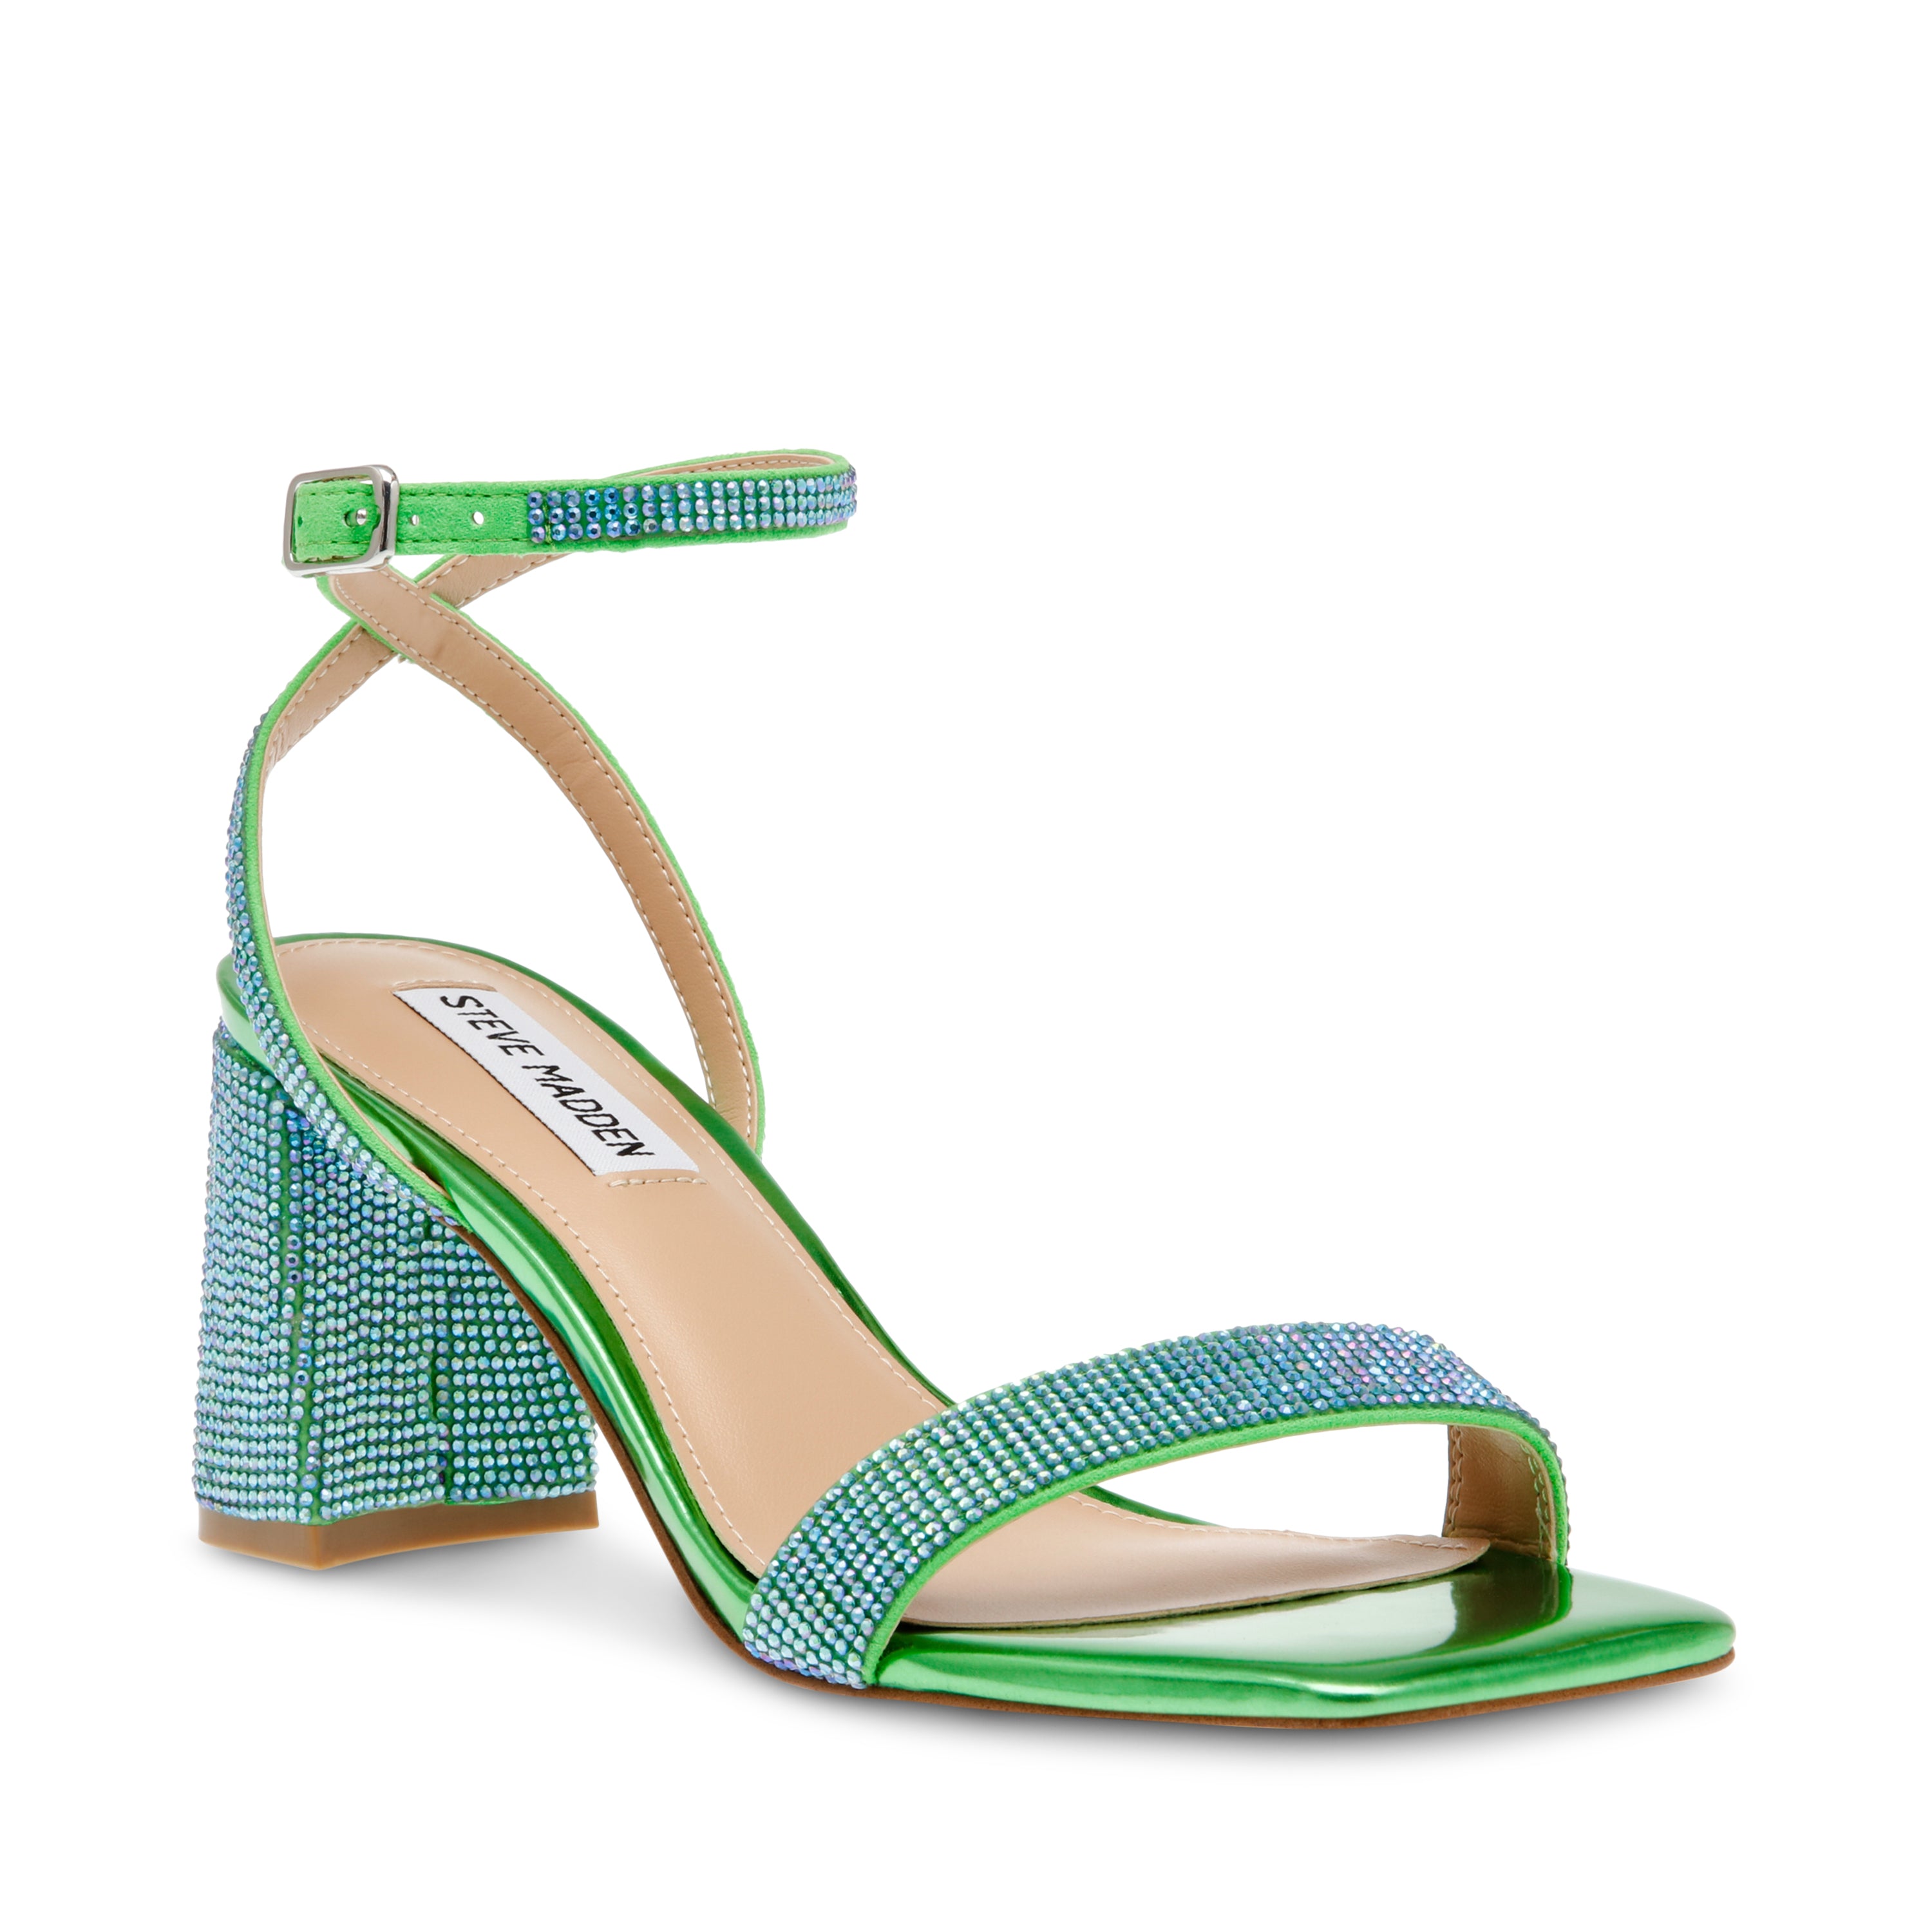 Luxe-R Sandal Green/Blue- Hover Image